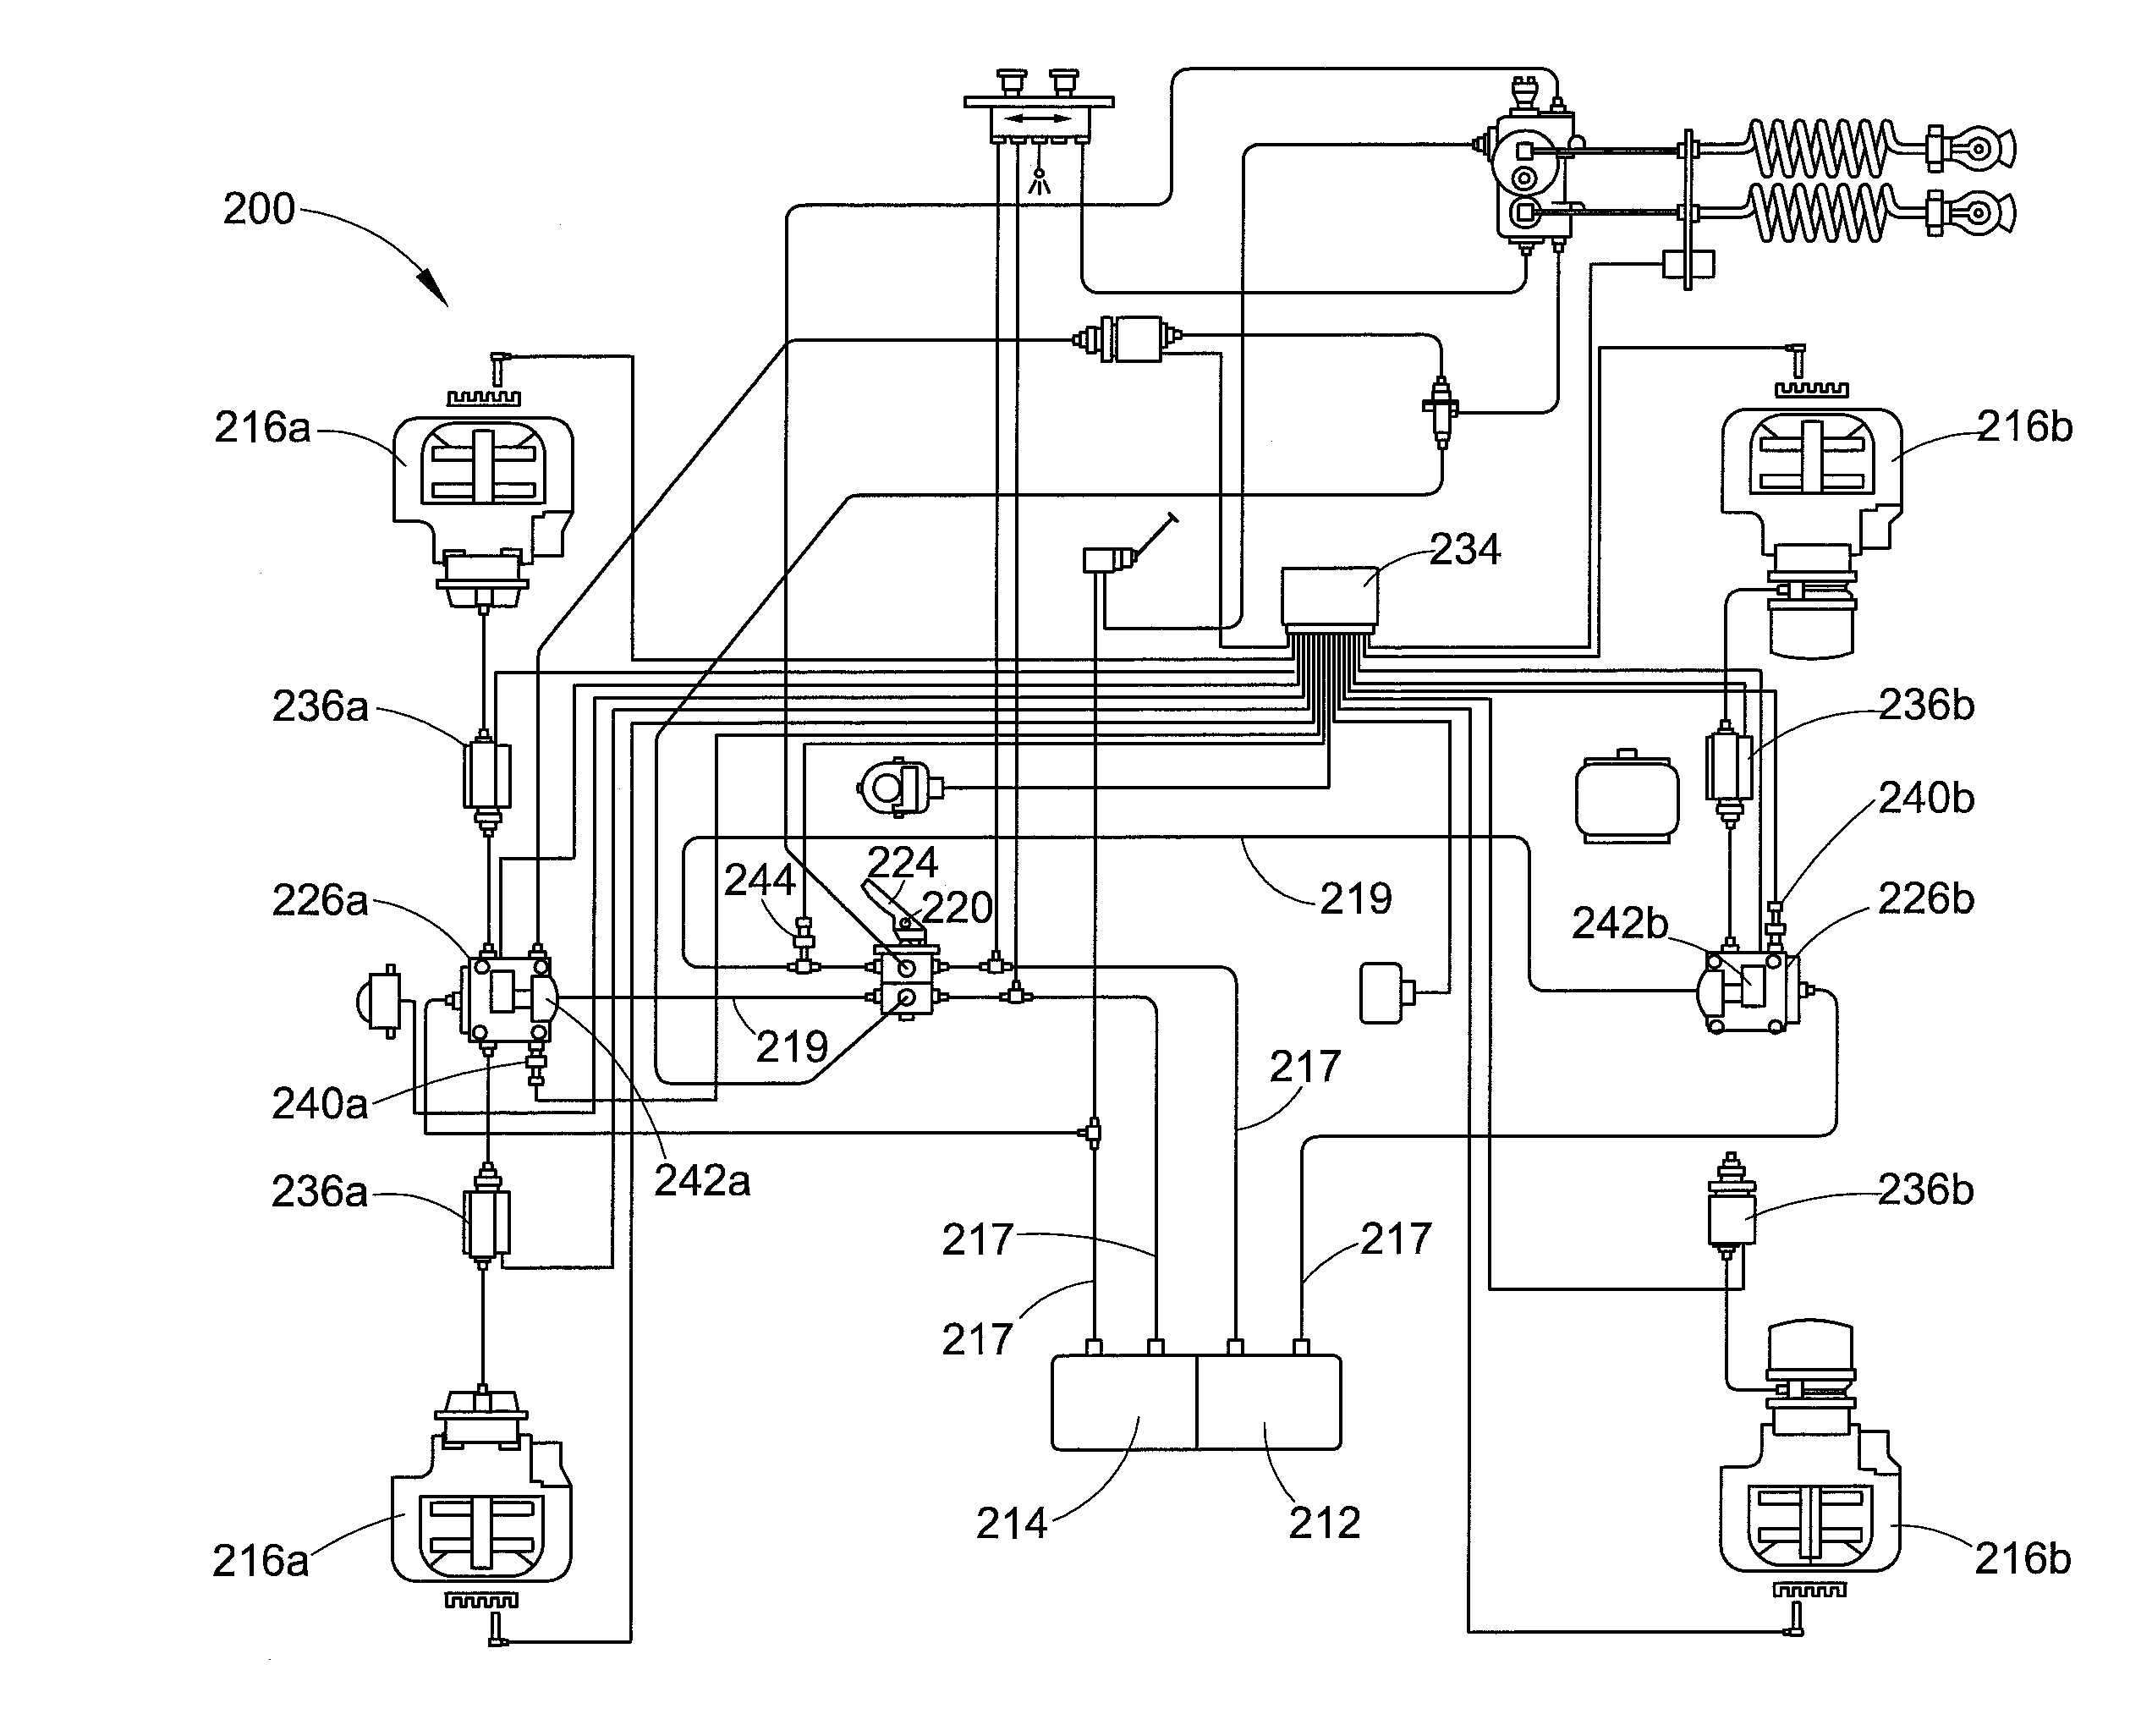 Automatic traction relay valve diagnostic using pressure transducer feedback